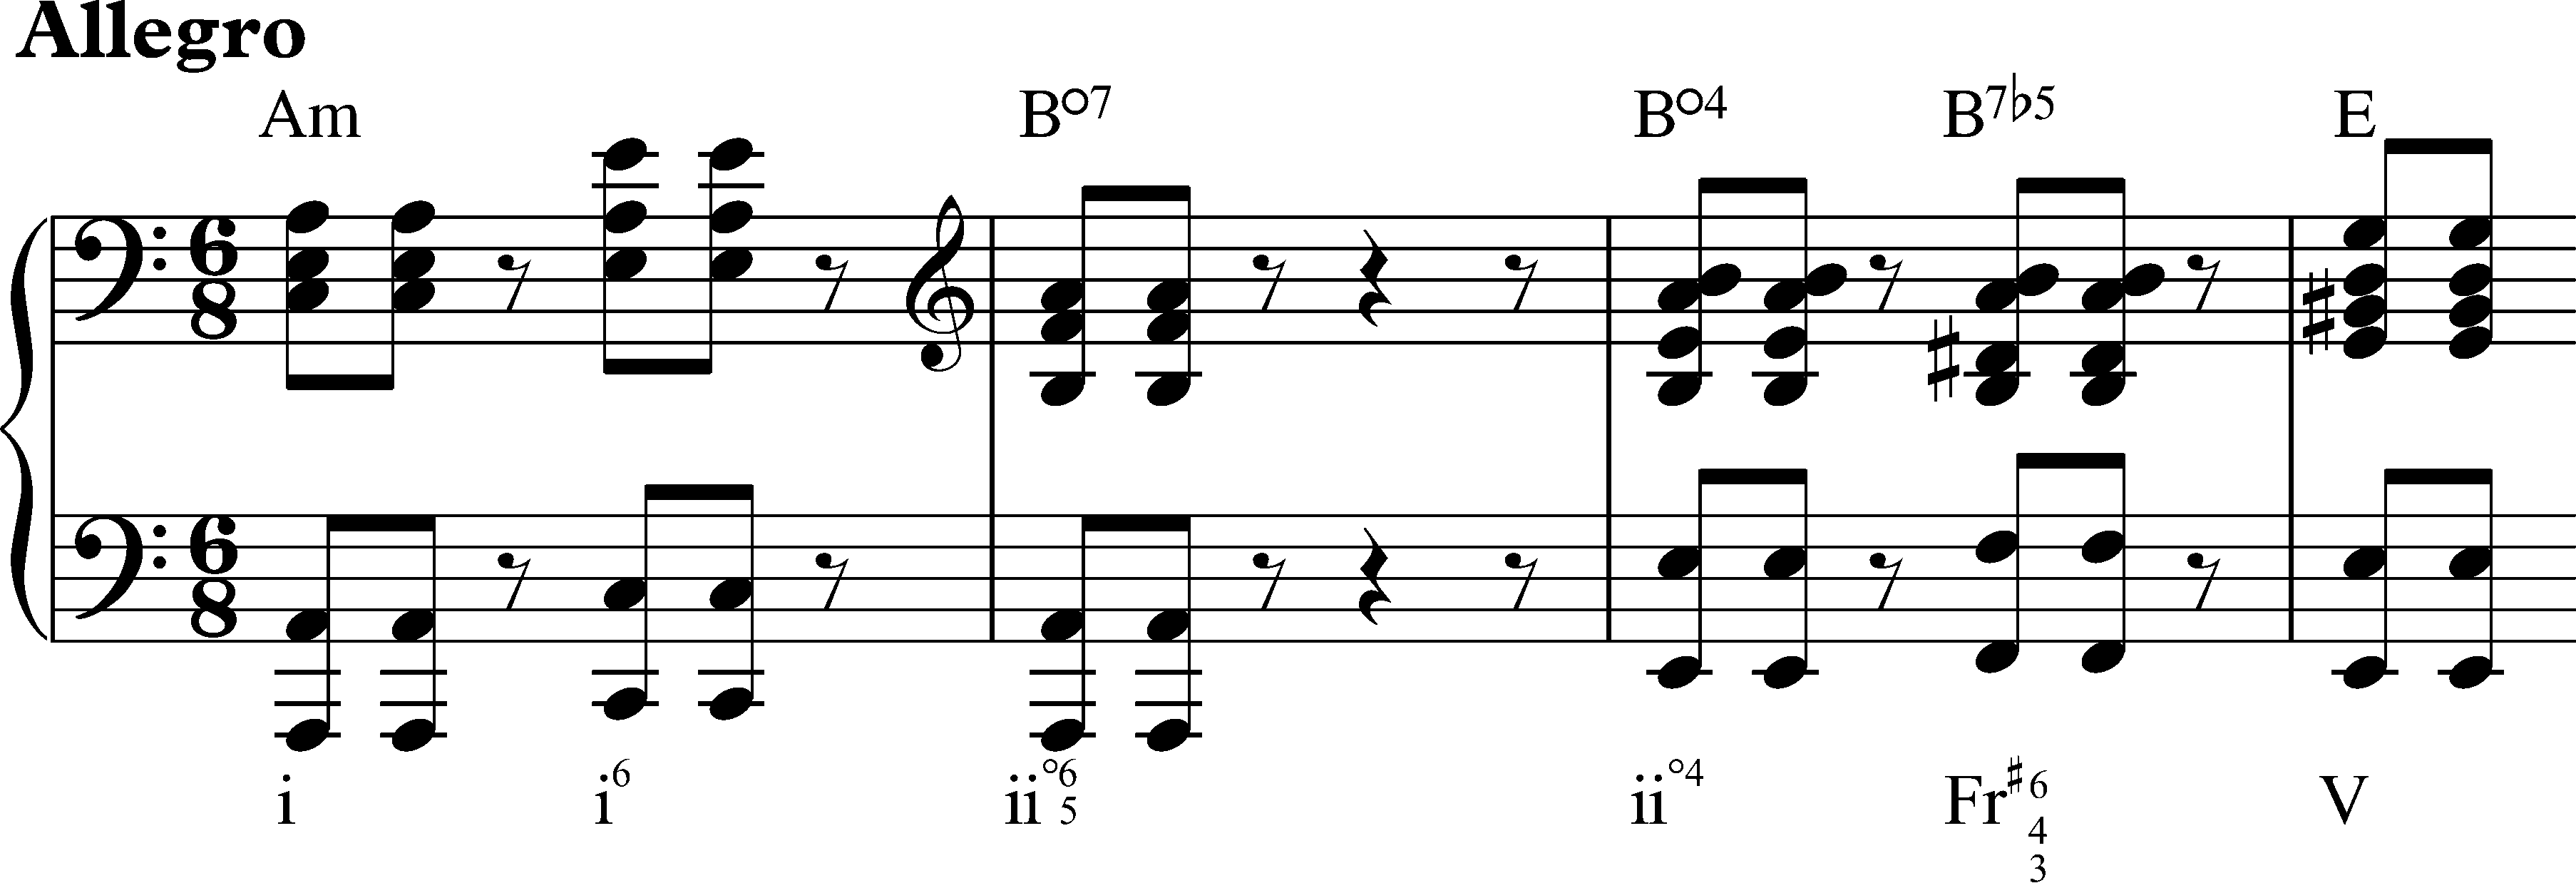 File:French sixth chord in Schubert's Am Feirabend.png - Wikipedia